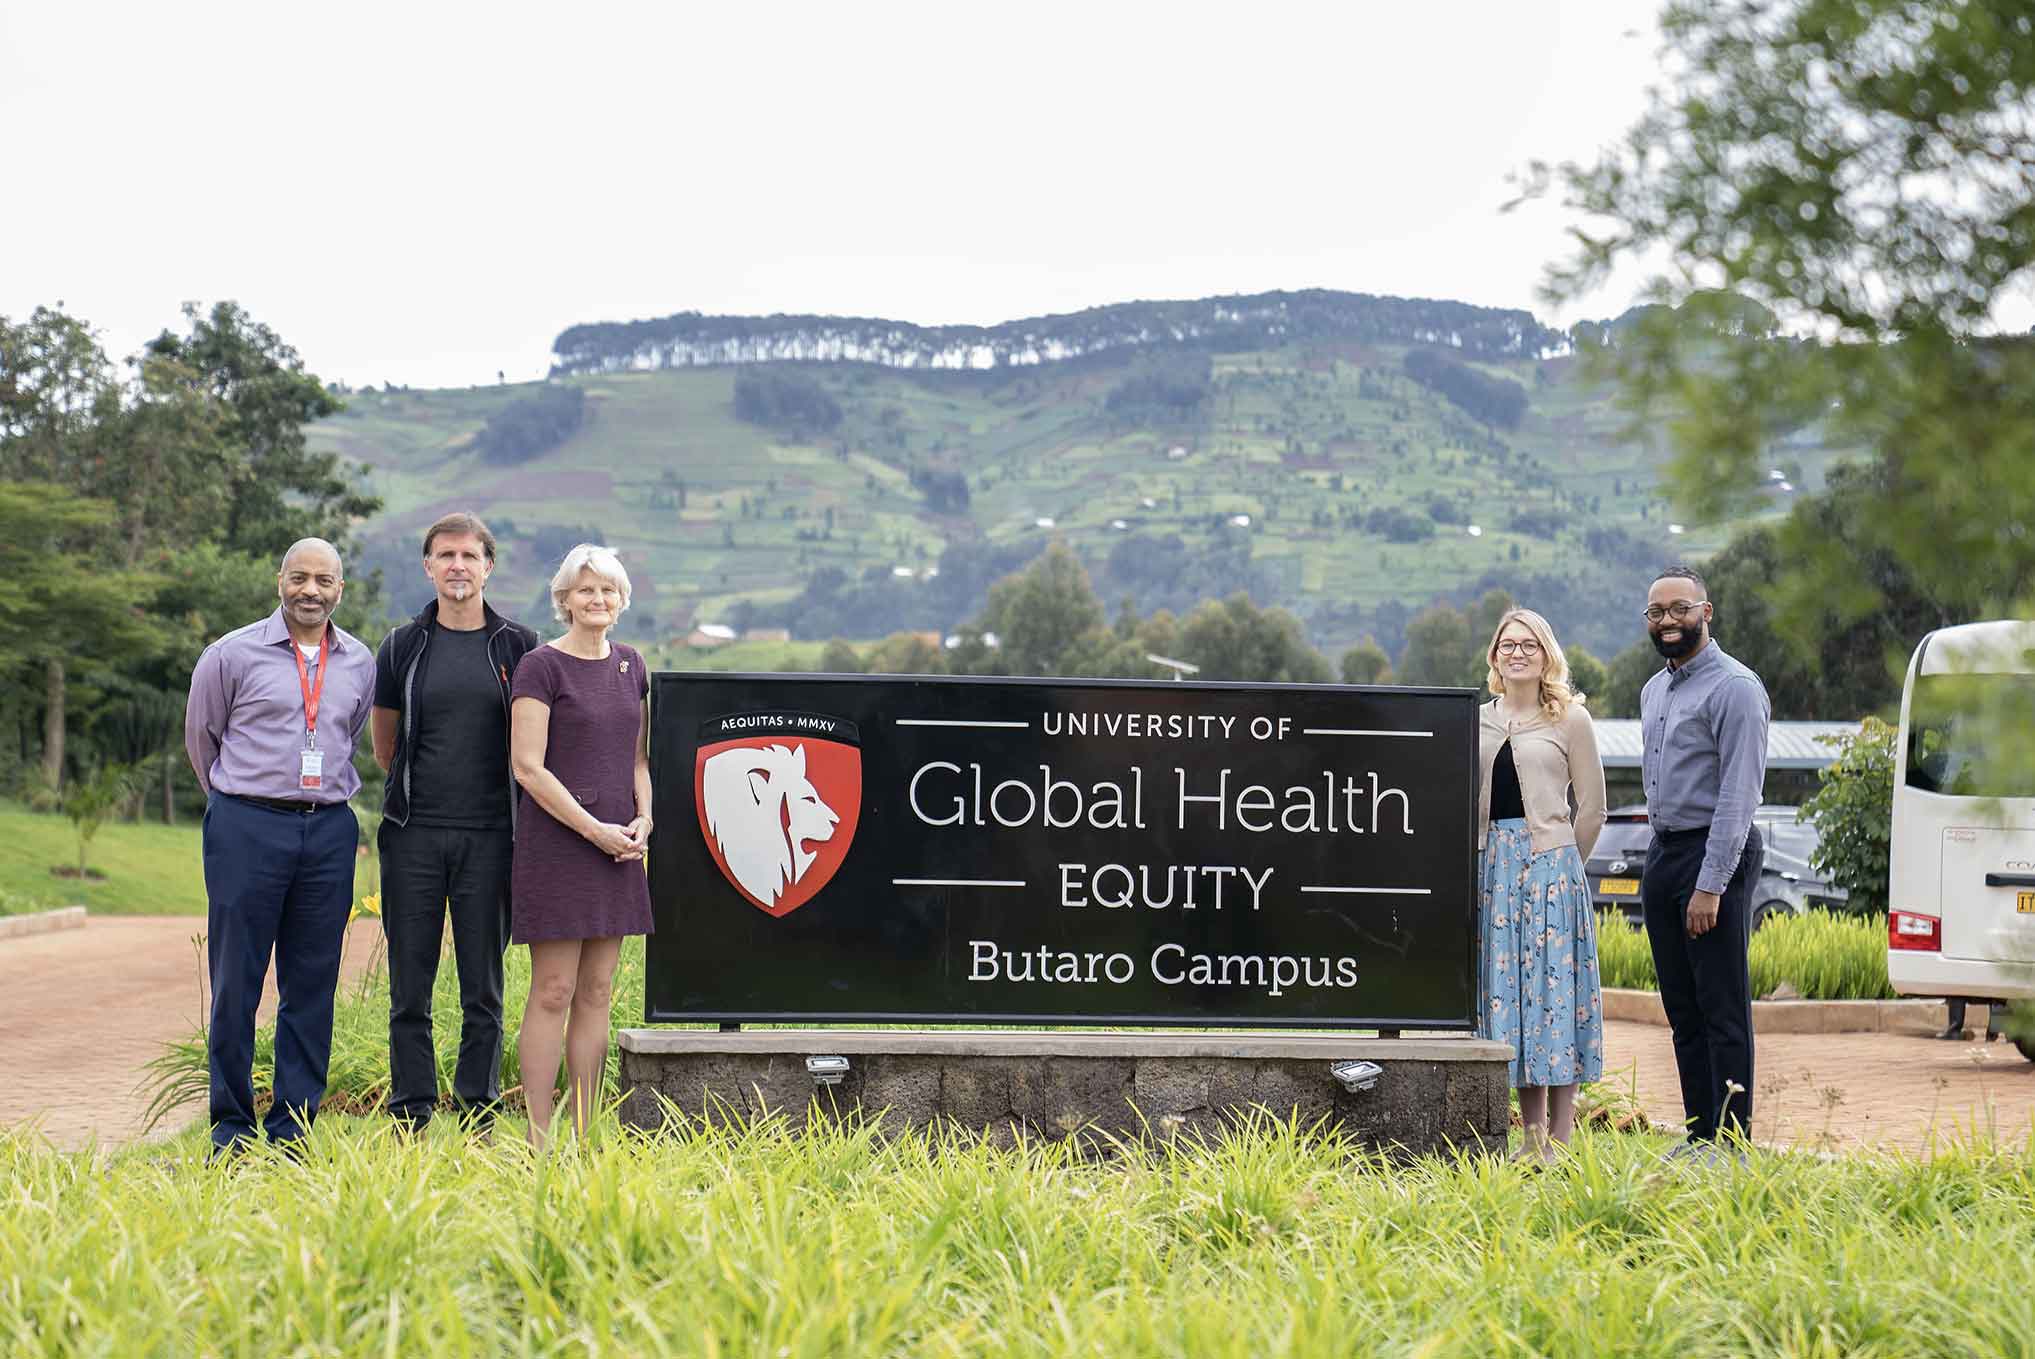 Five people stand next to a sign that reads “University of Global Health Equity; Butaro Campus”. The sign is placed in a grassy natural area with a farmland-covered hill in the background.